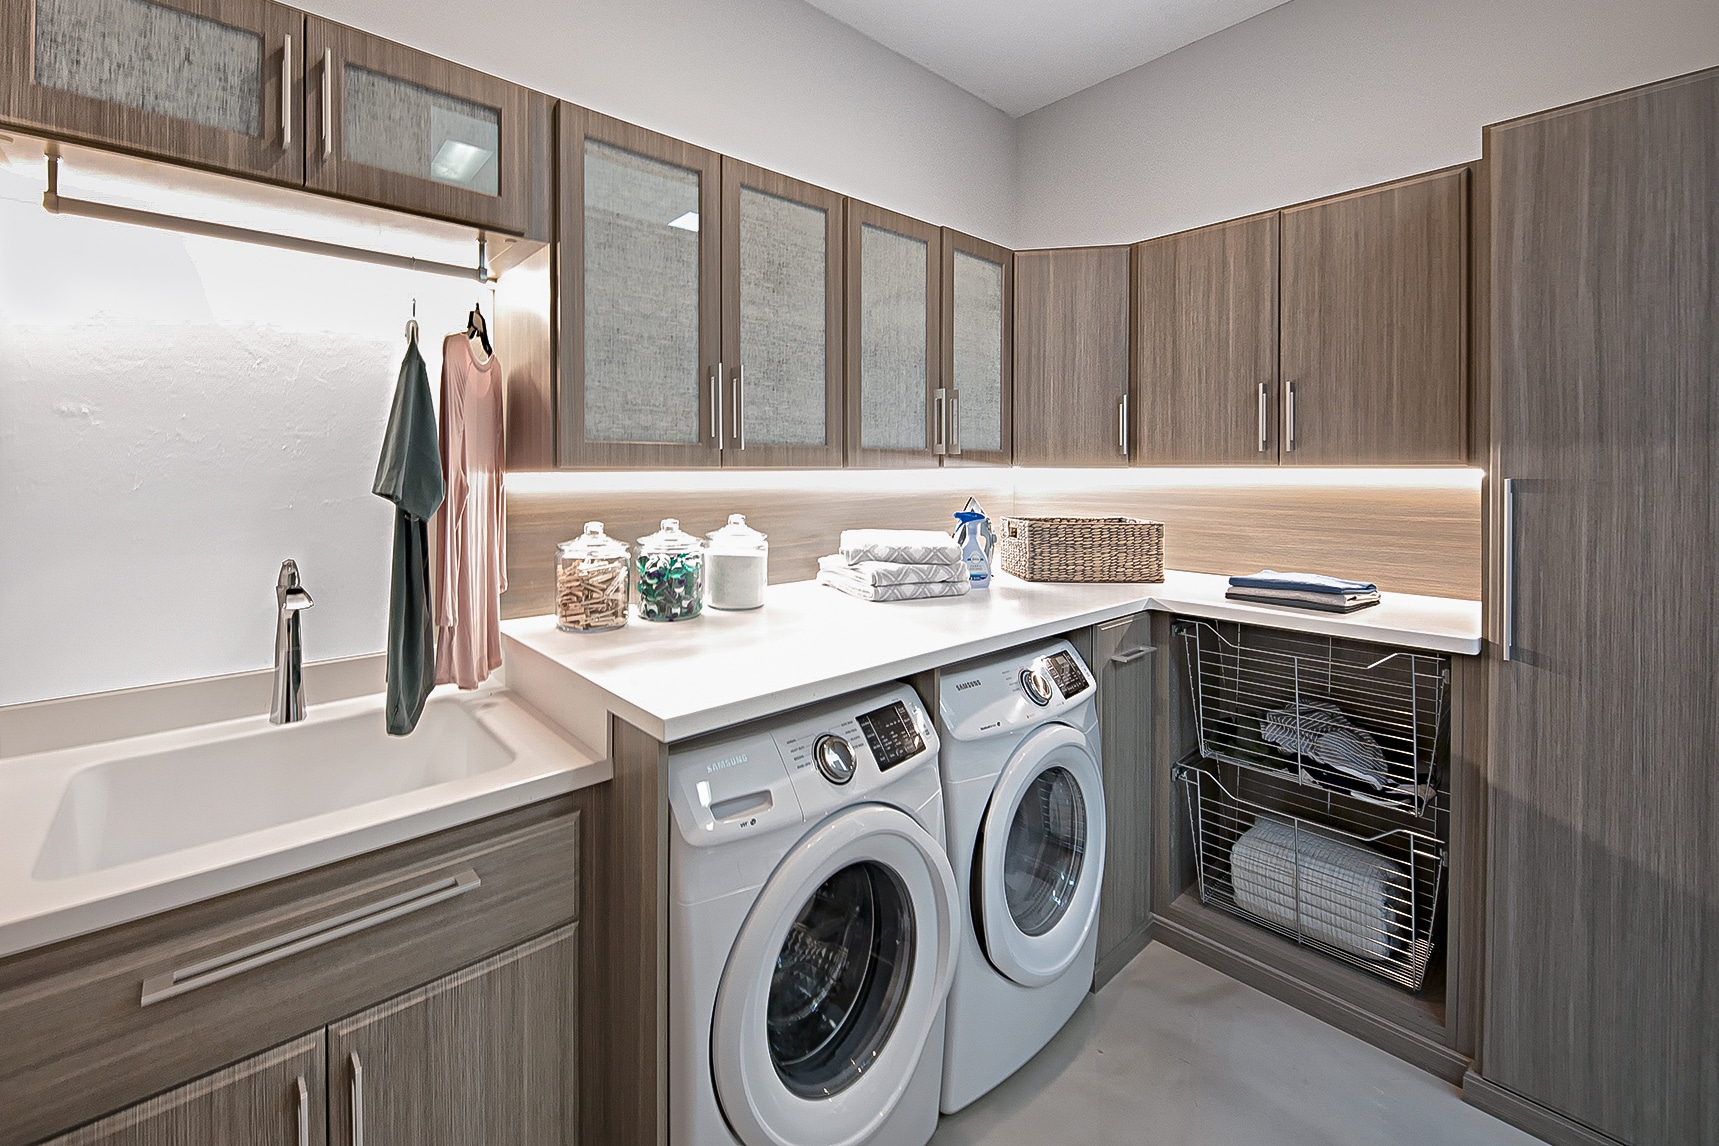 LAUNDRY ROOM LAYOUTS AND CABINETS